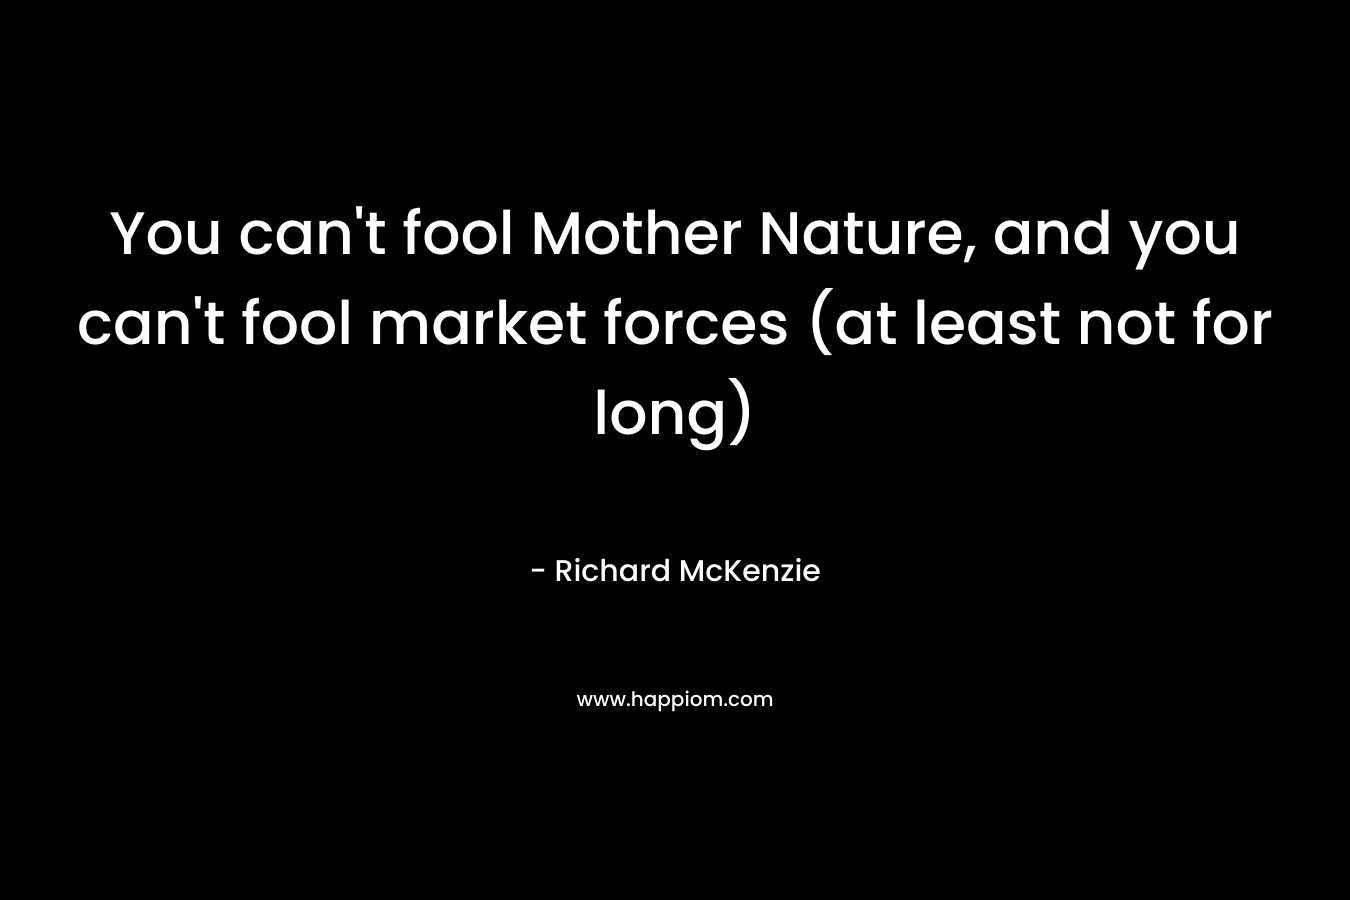 You can't fool Mother Nature, and you can't fool market forces (at least not for long)